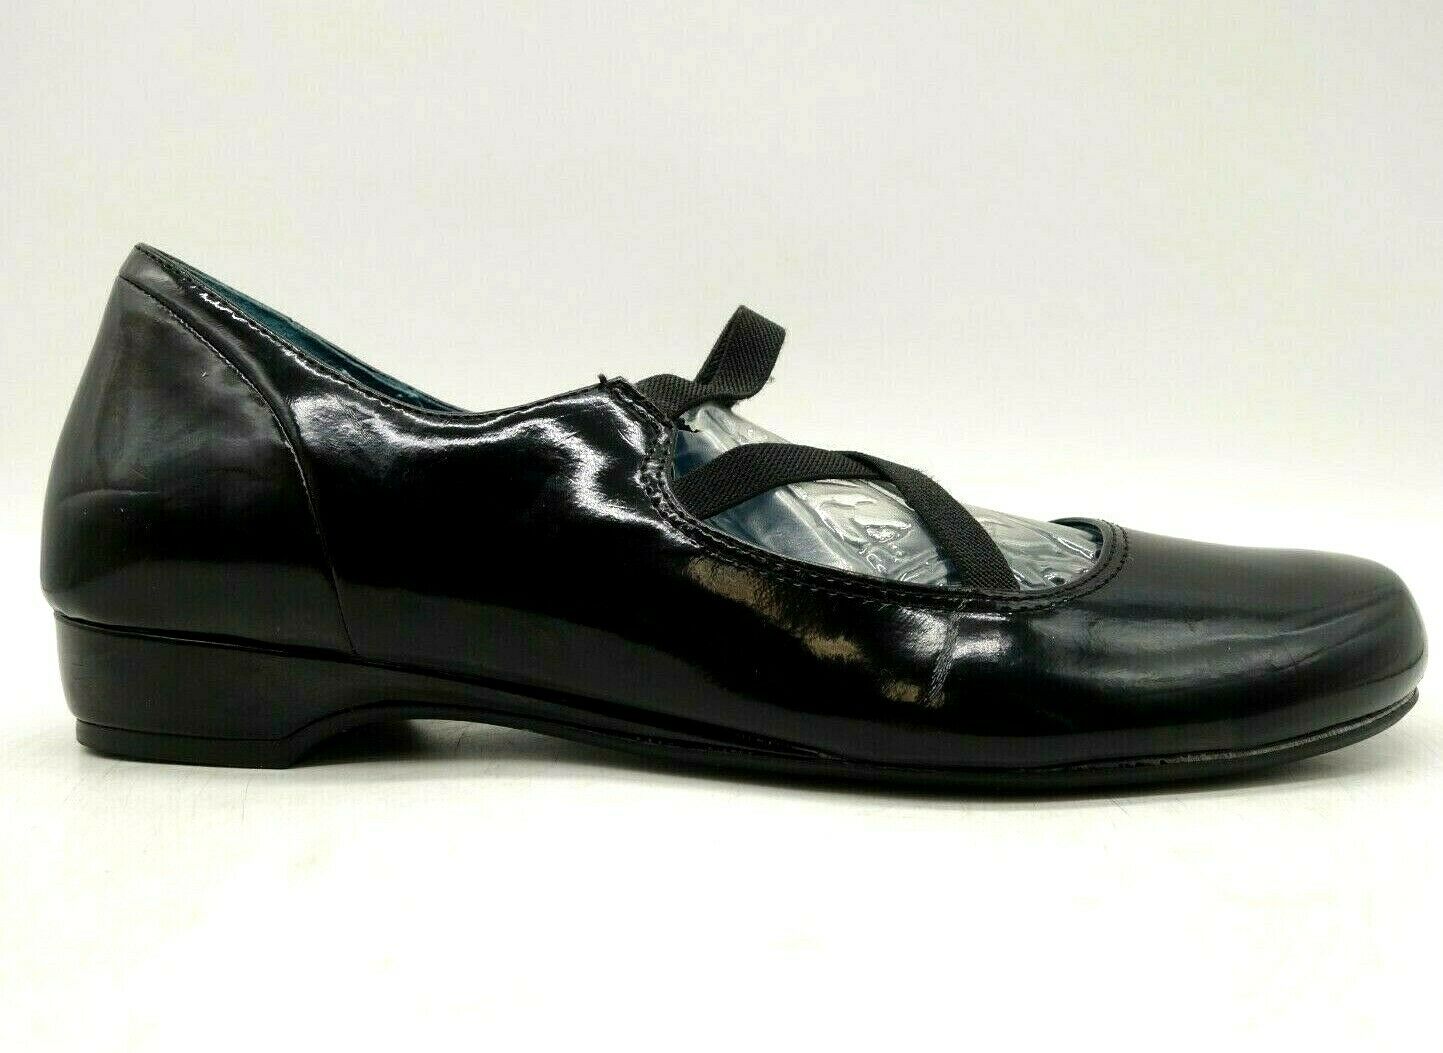 Vionic Black Patent Leather Dress Casual Slip On Comfort Loafers Shoes Women's 7